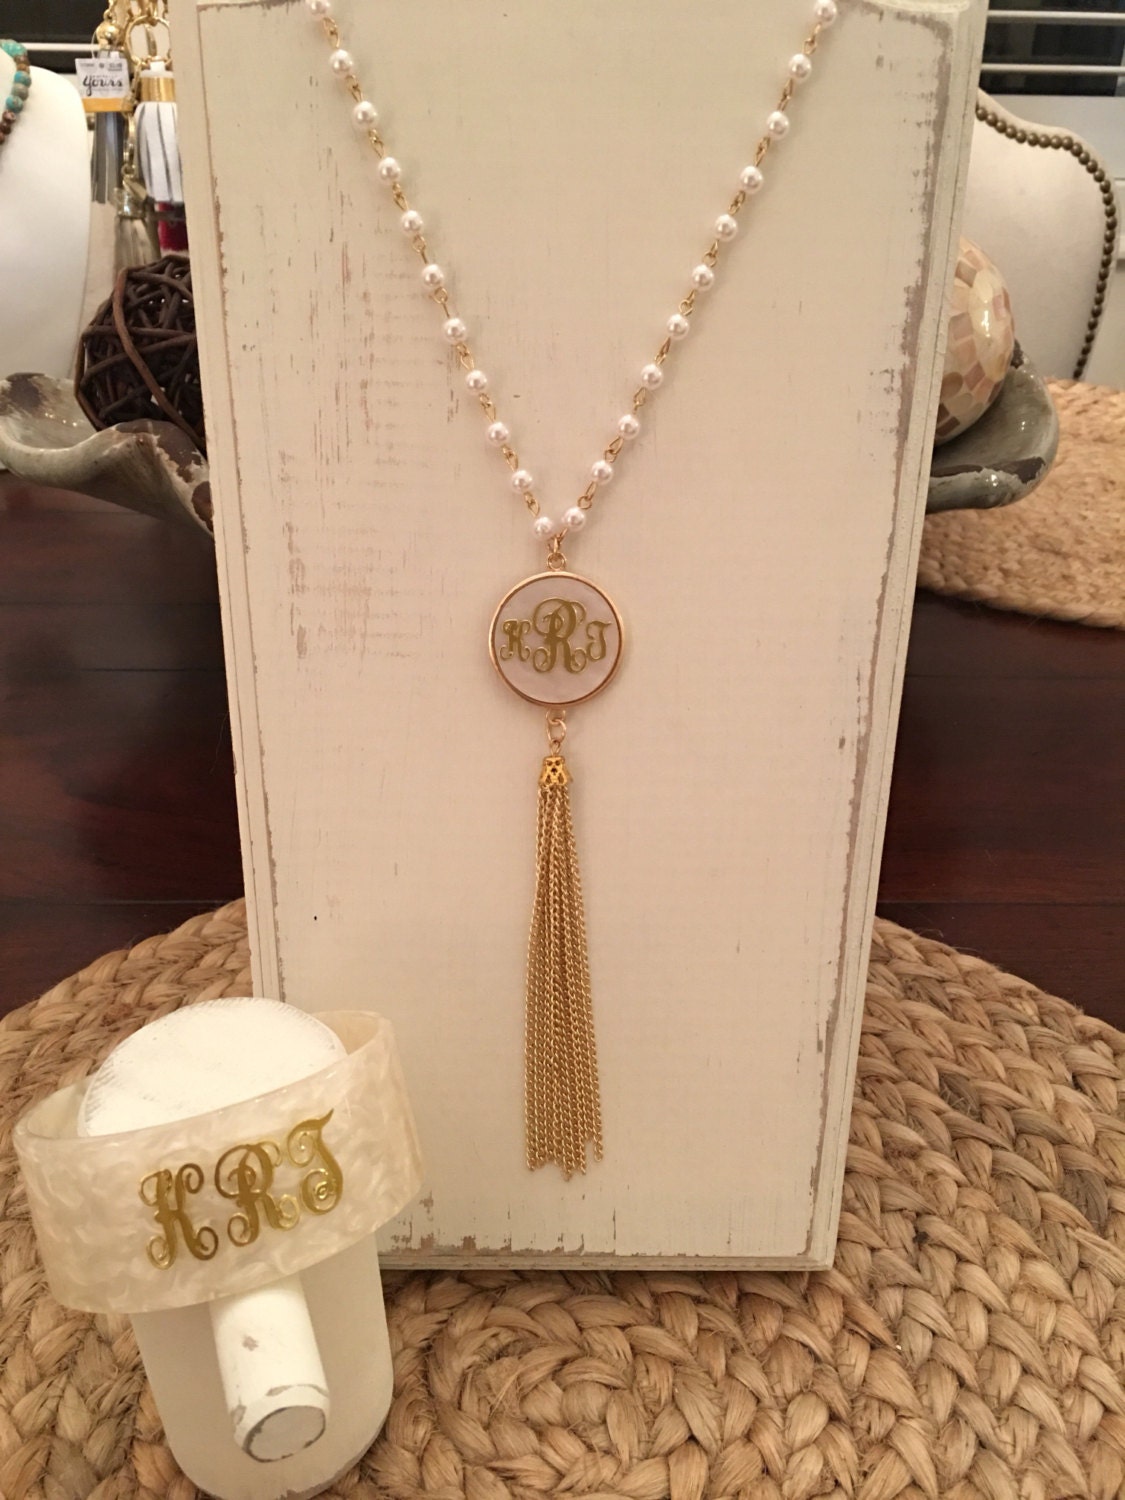 Gorgeous Pearl and Gold Monogrammed Necklace and Bracelet set with Chain Tassel